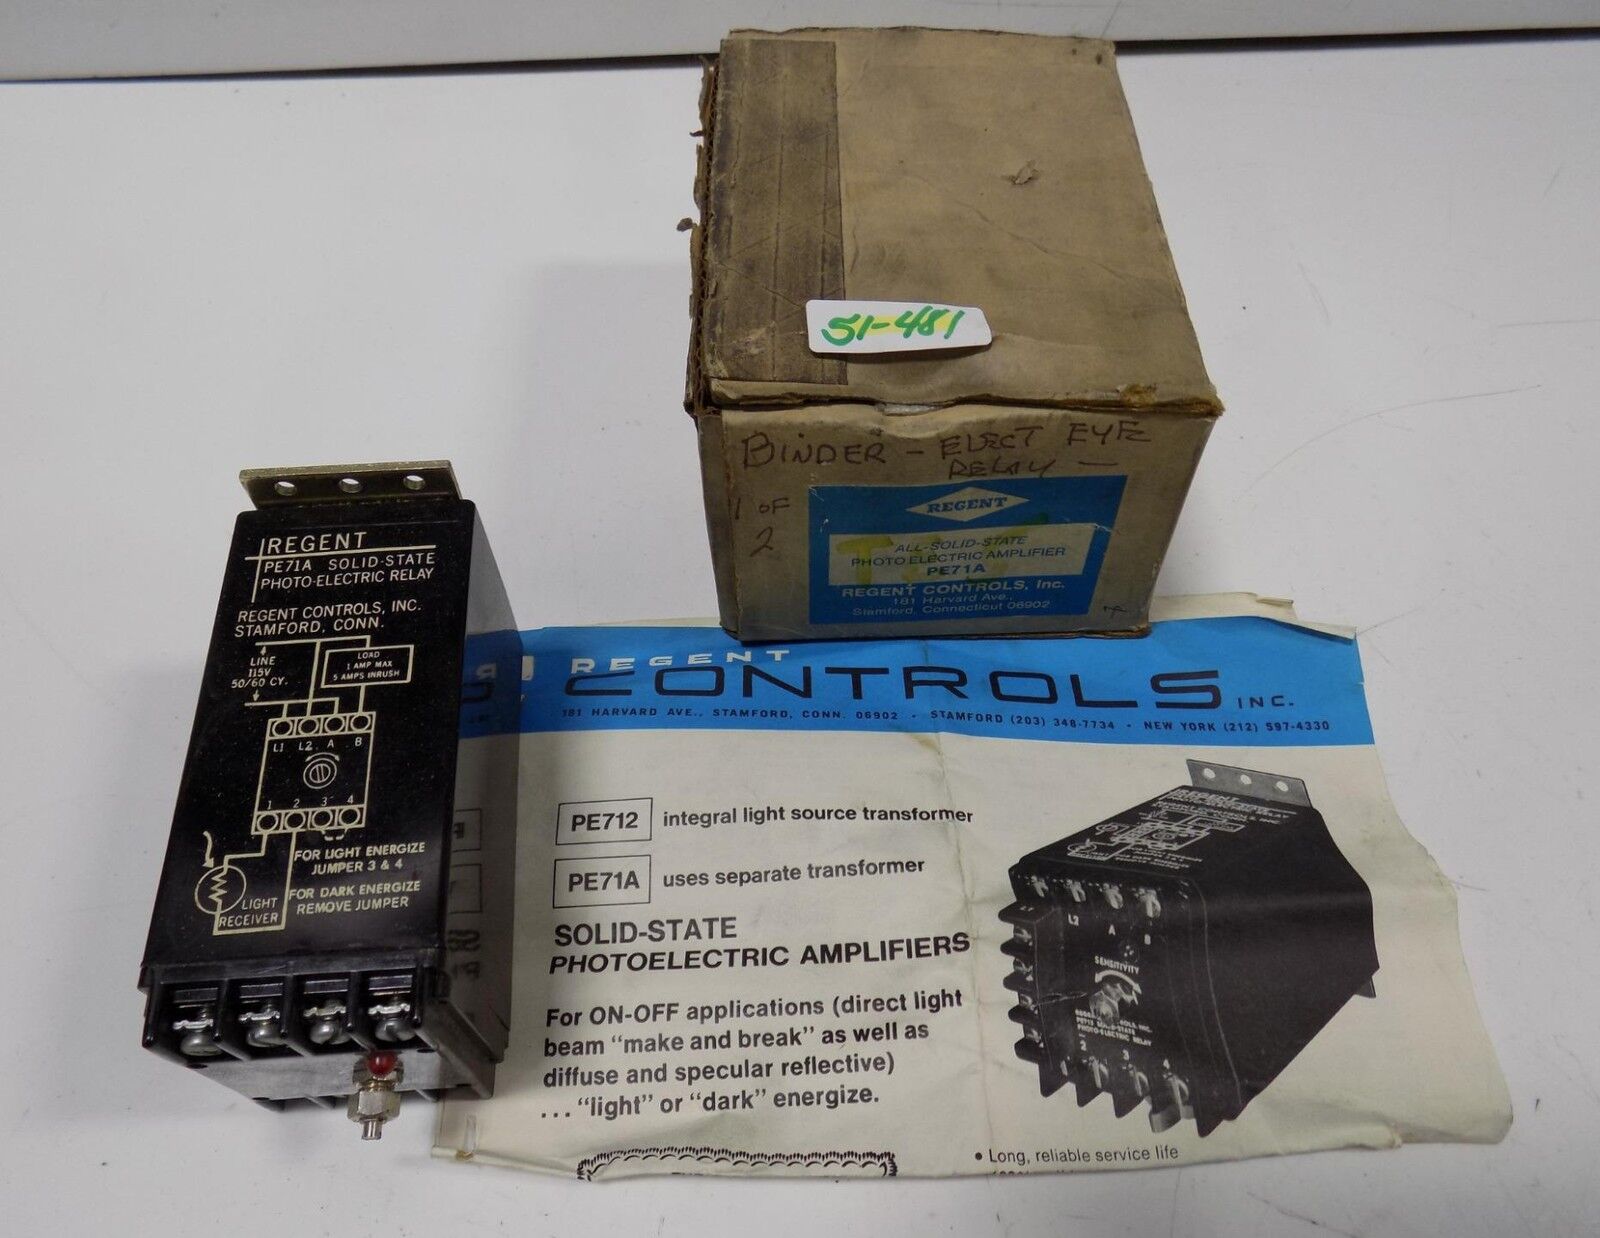 REGENT ALL-SOLID STATE PHOTOELECTRIC AMPLIFIER  PE71A NIB